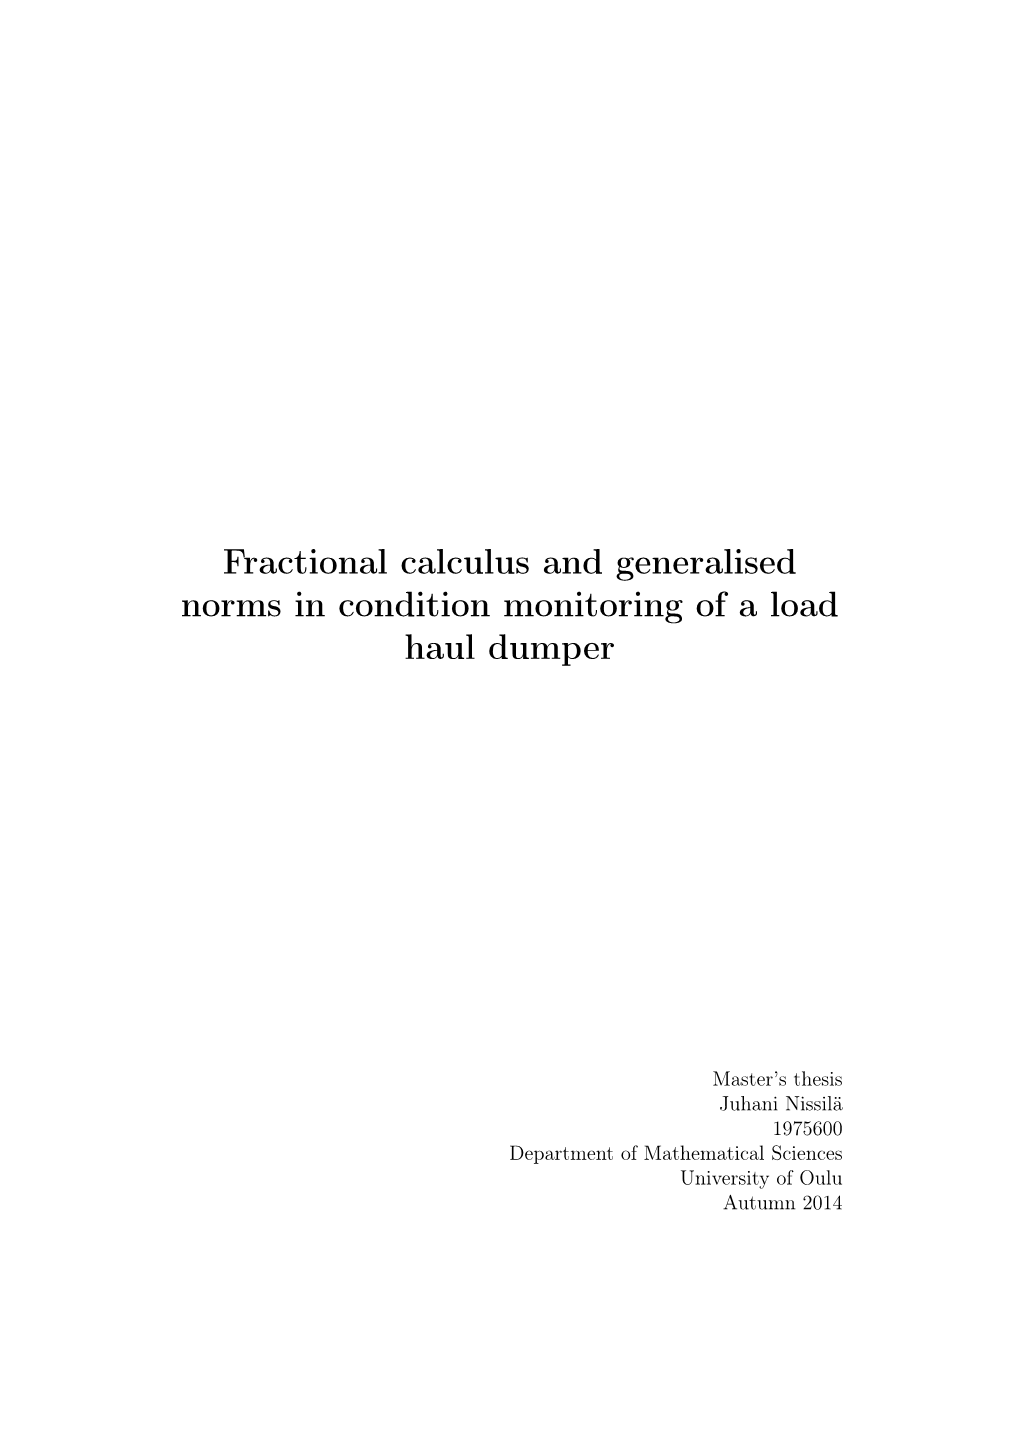 Fractional Calculus and Generalised Norms in Condition Monitoring of a Load Haul Dumper